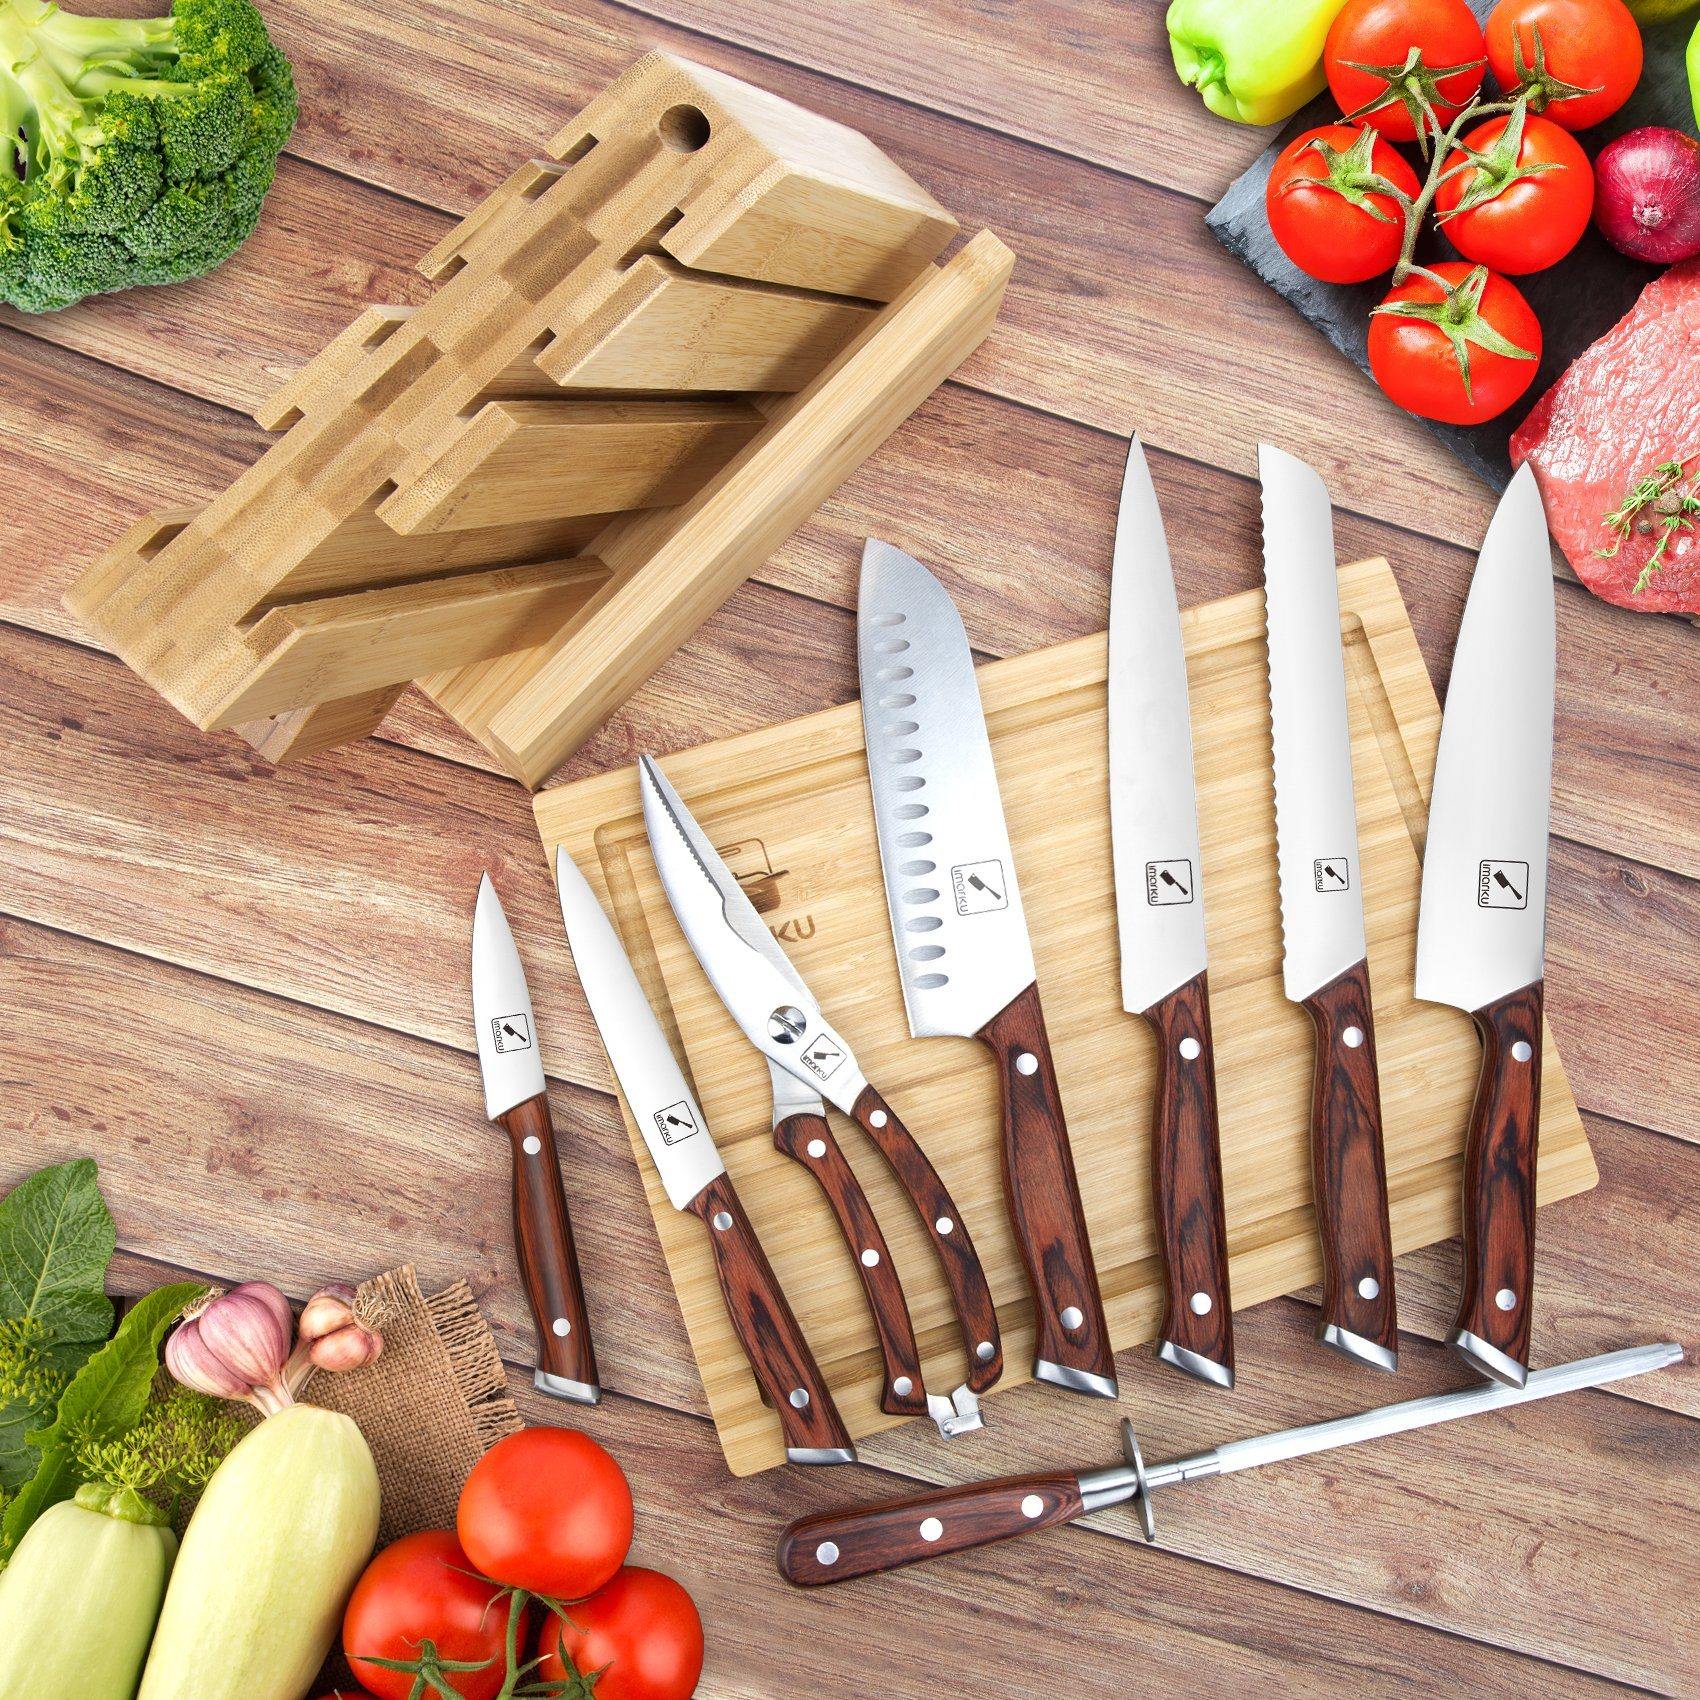 10 Pieces Stainless Steel Knife Set with Cutting Board Knife Set imarku 